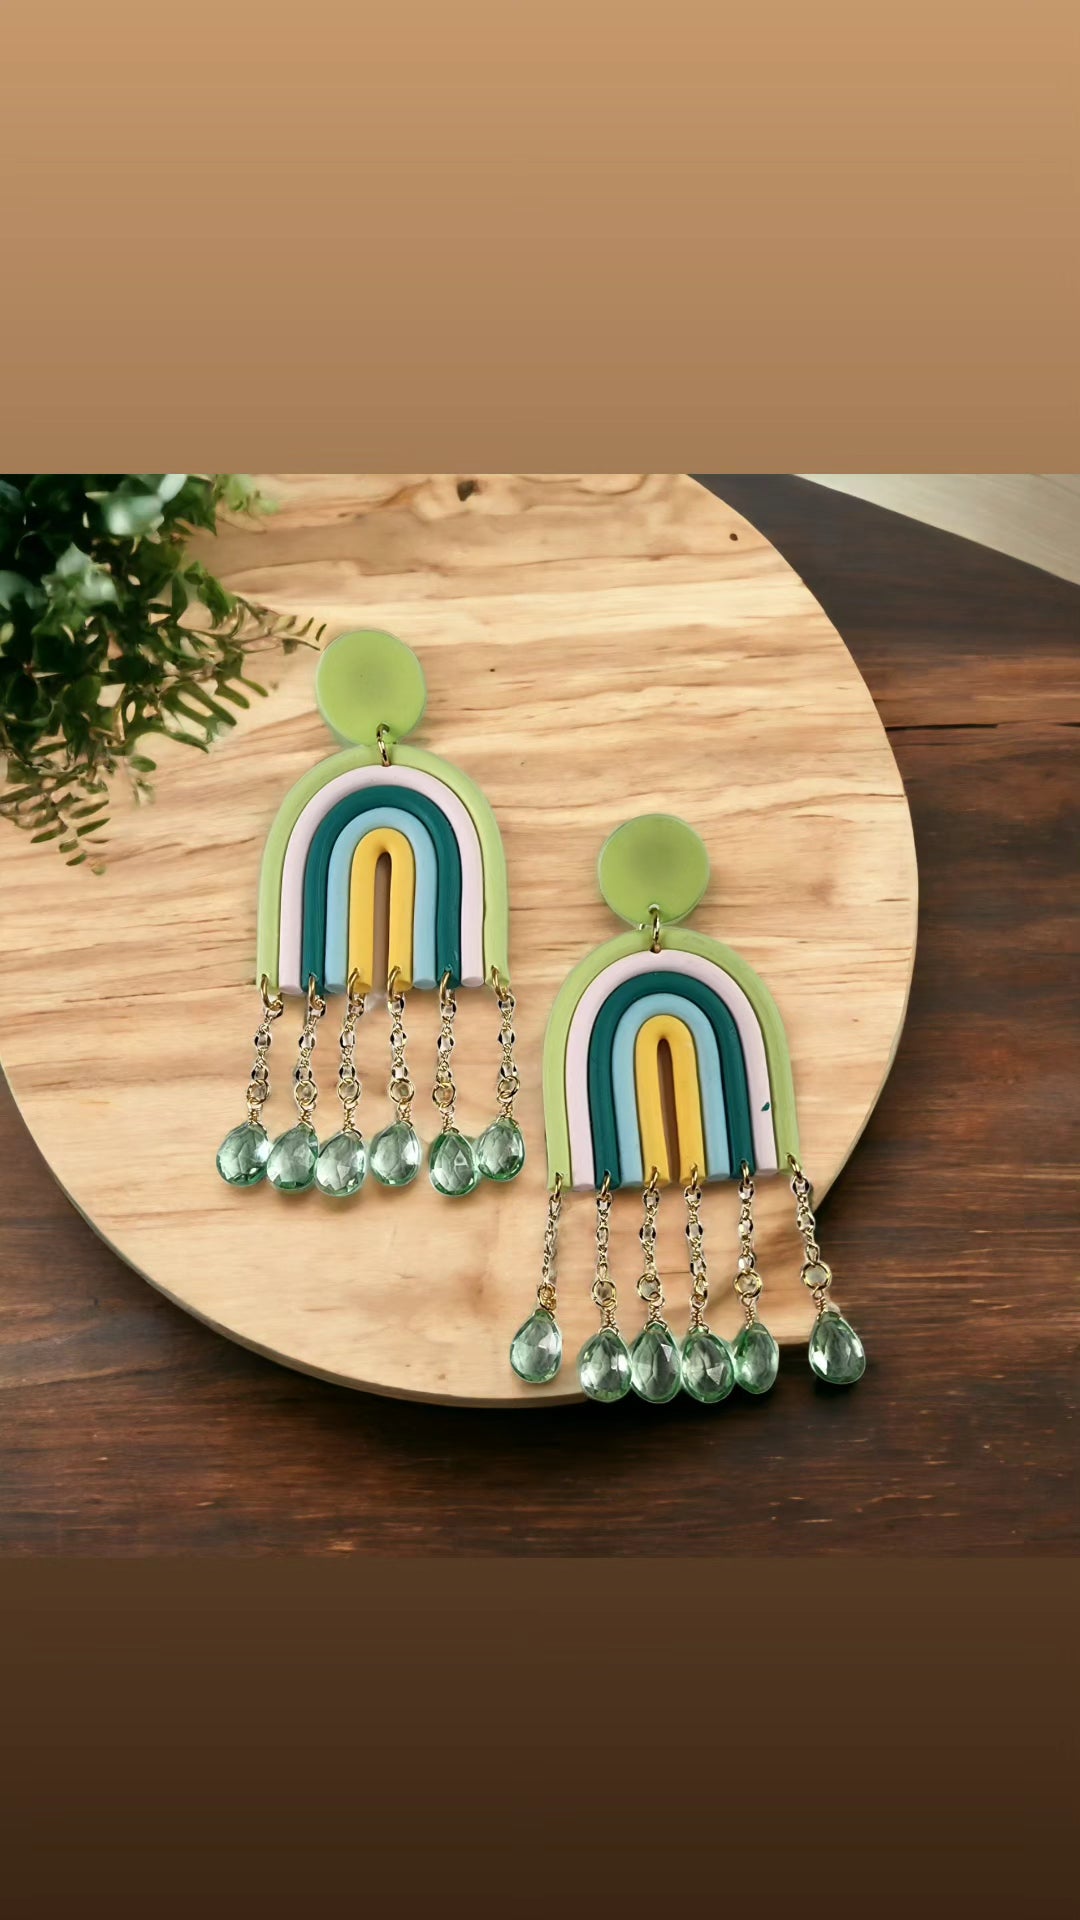 The Rainbow Gem Earring Collection